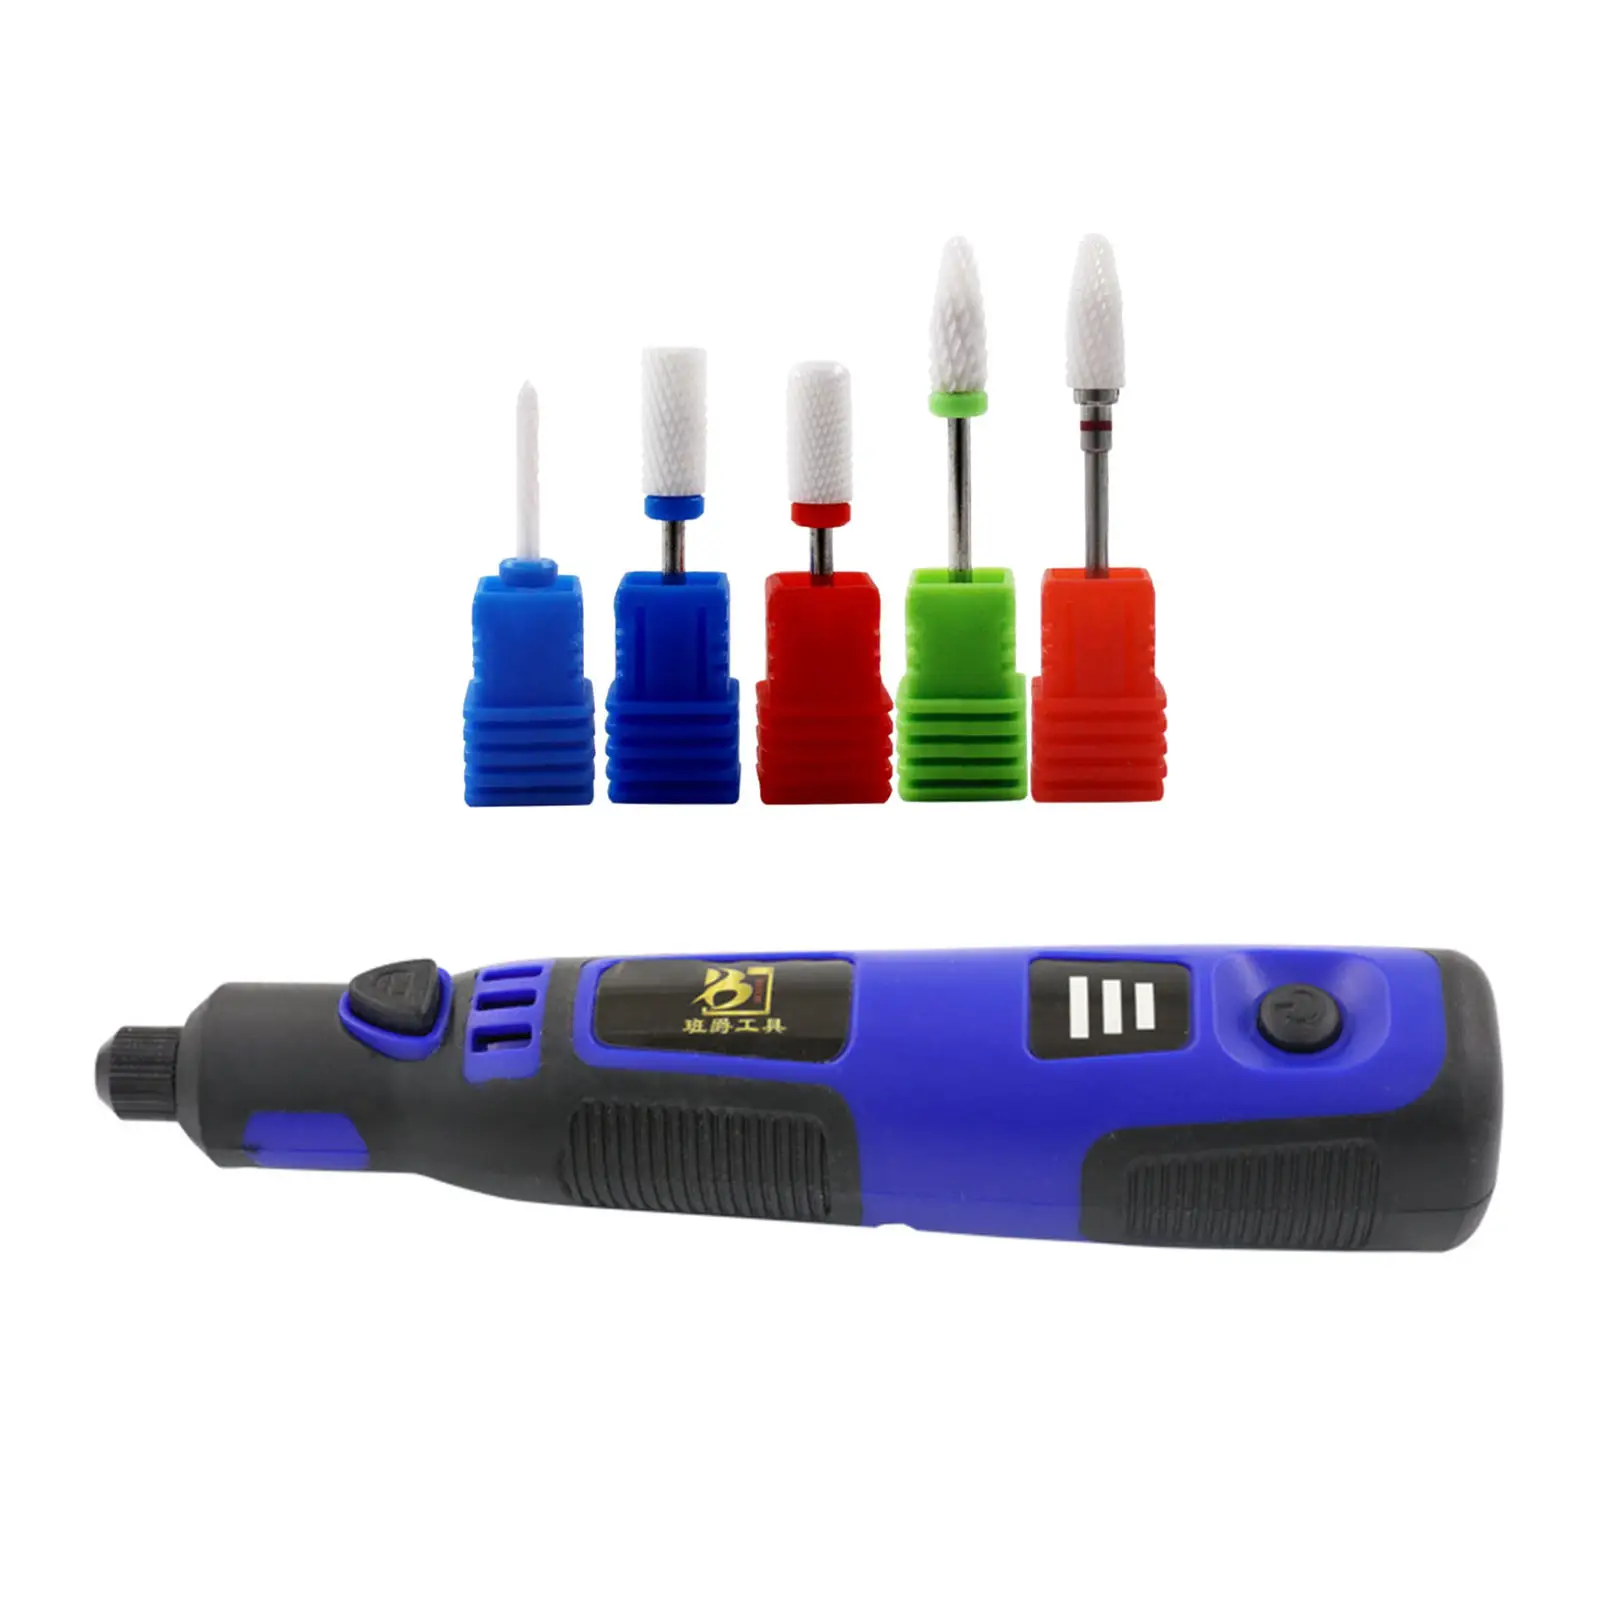 Electric 3.6V Nail Drill Kit 3-Gear Speed 5000-15000rpm Manicure Pedicure Polishing Carving Shape Grinder Pen Crafts